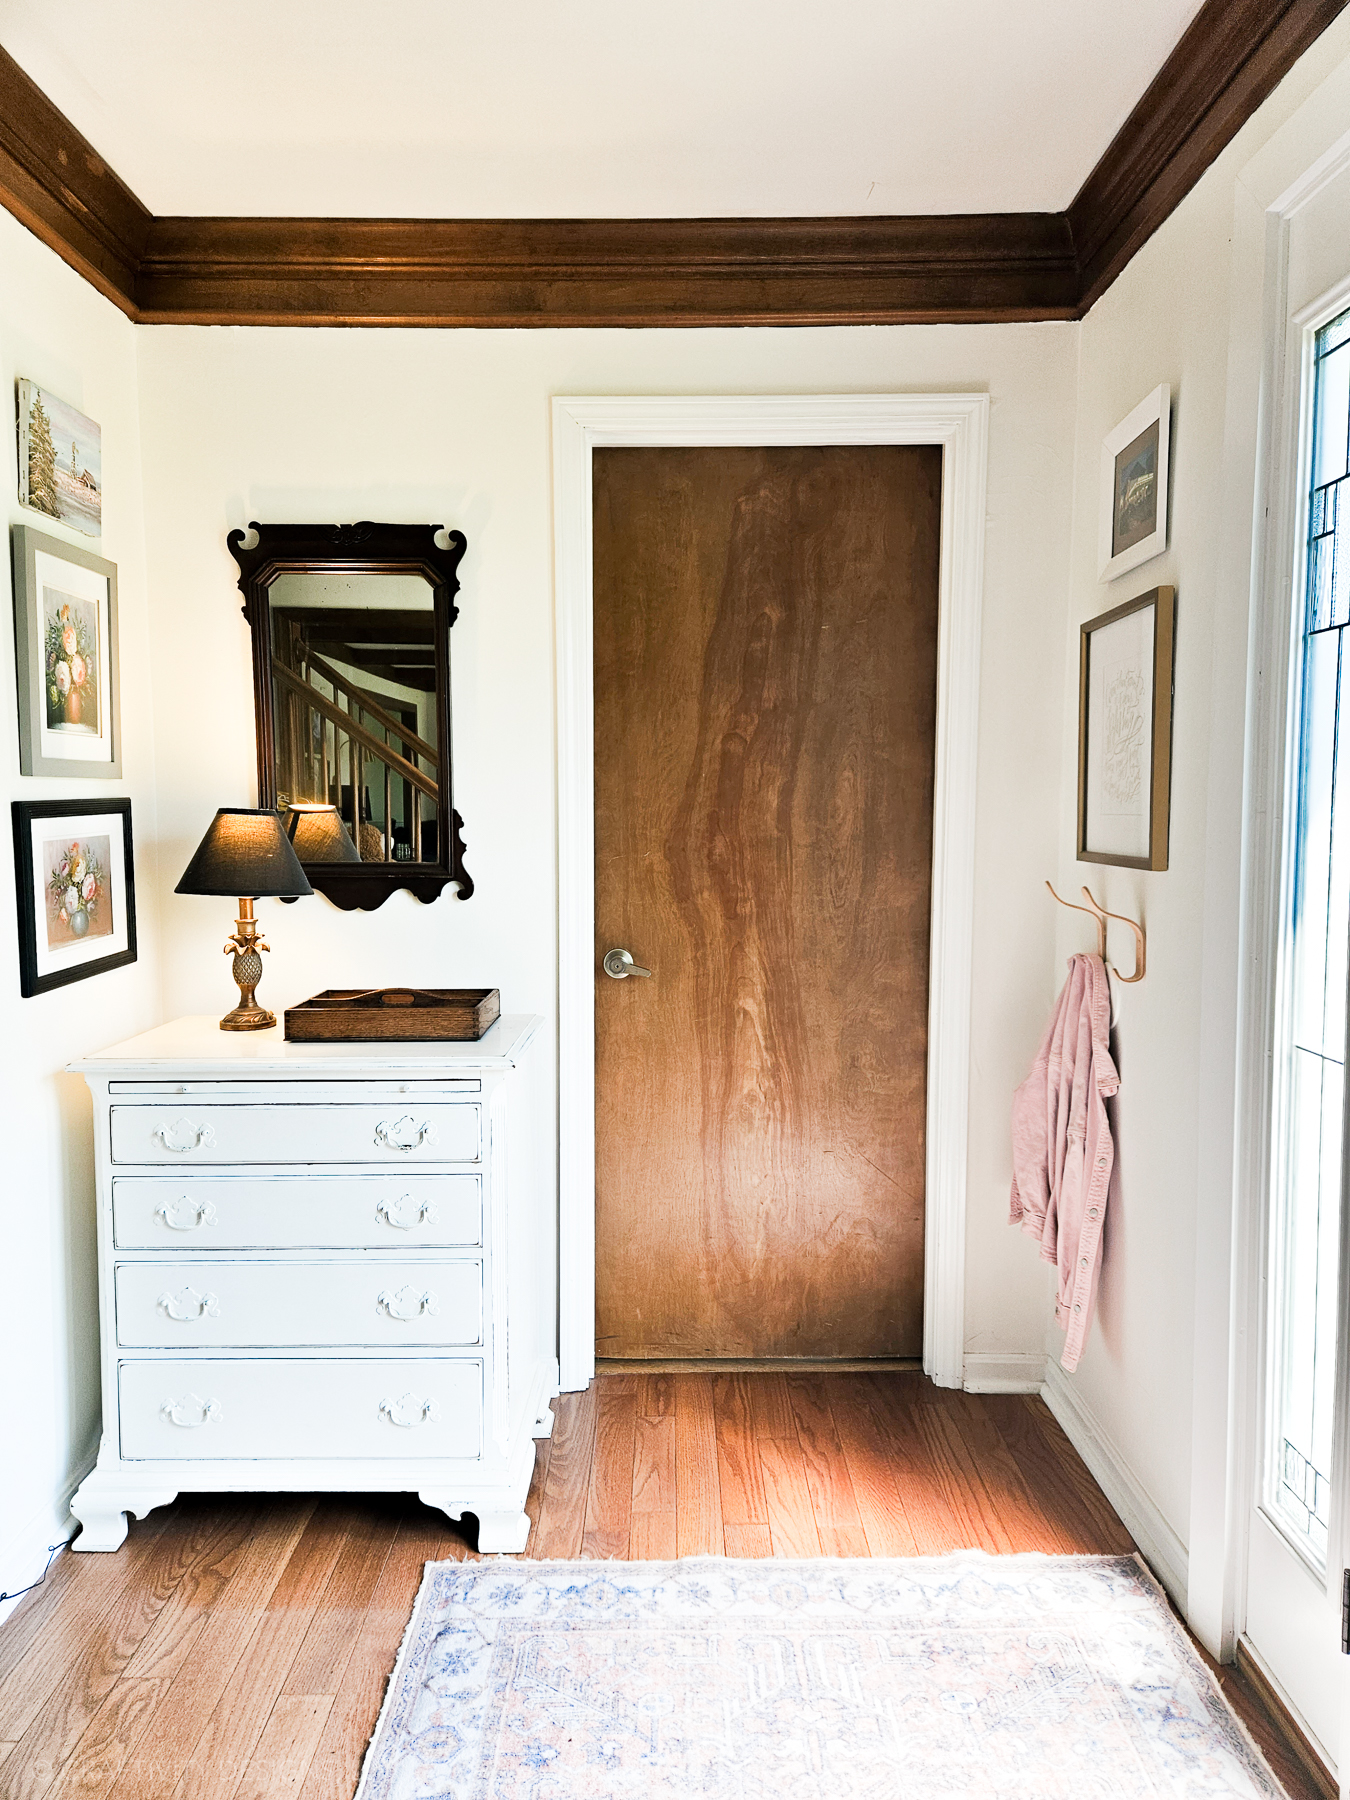 How to Mix Wood Stained Doors with White Trim (with examples